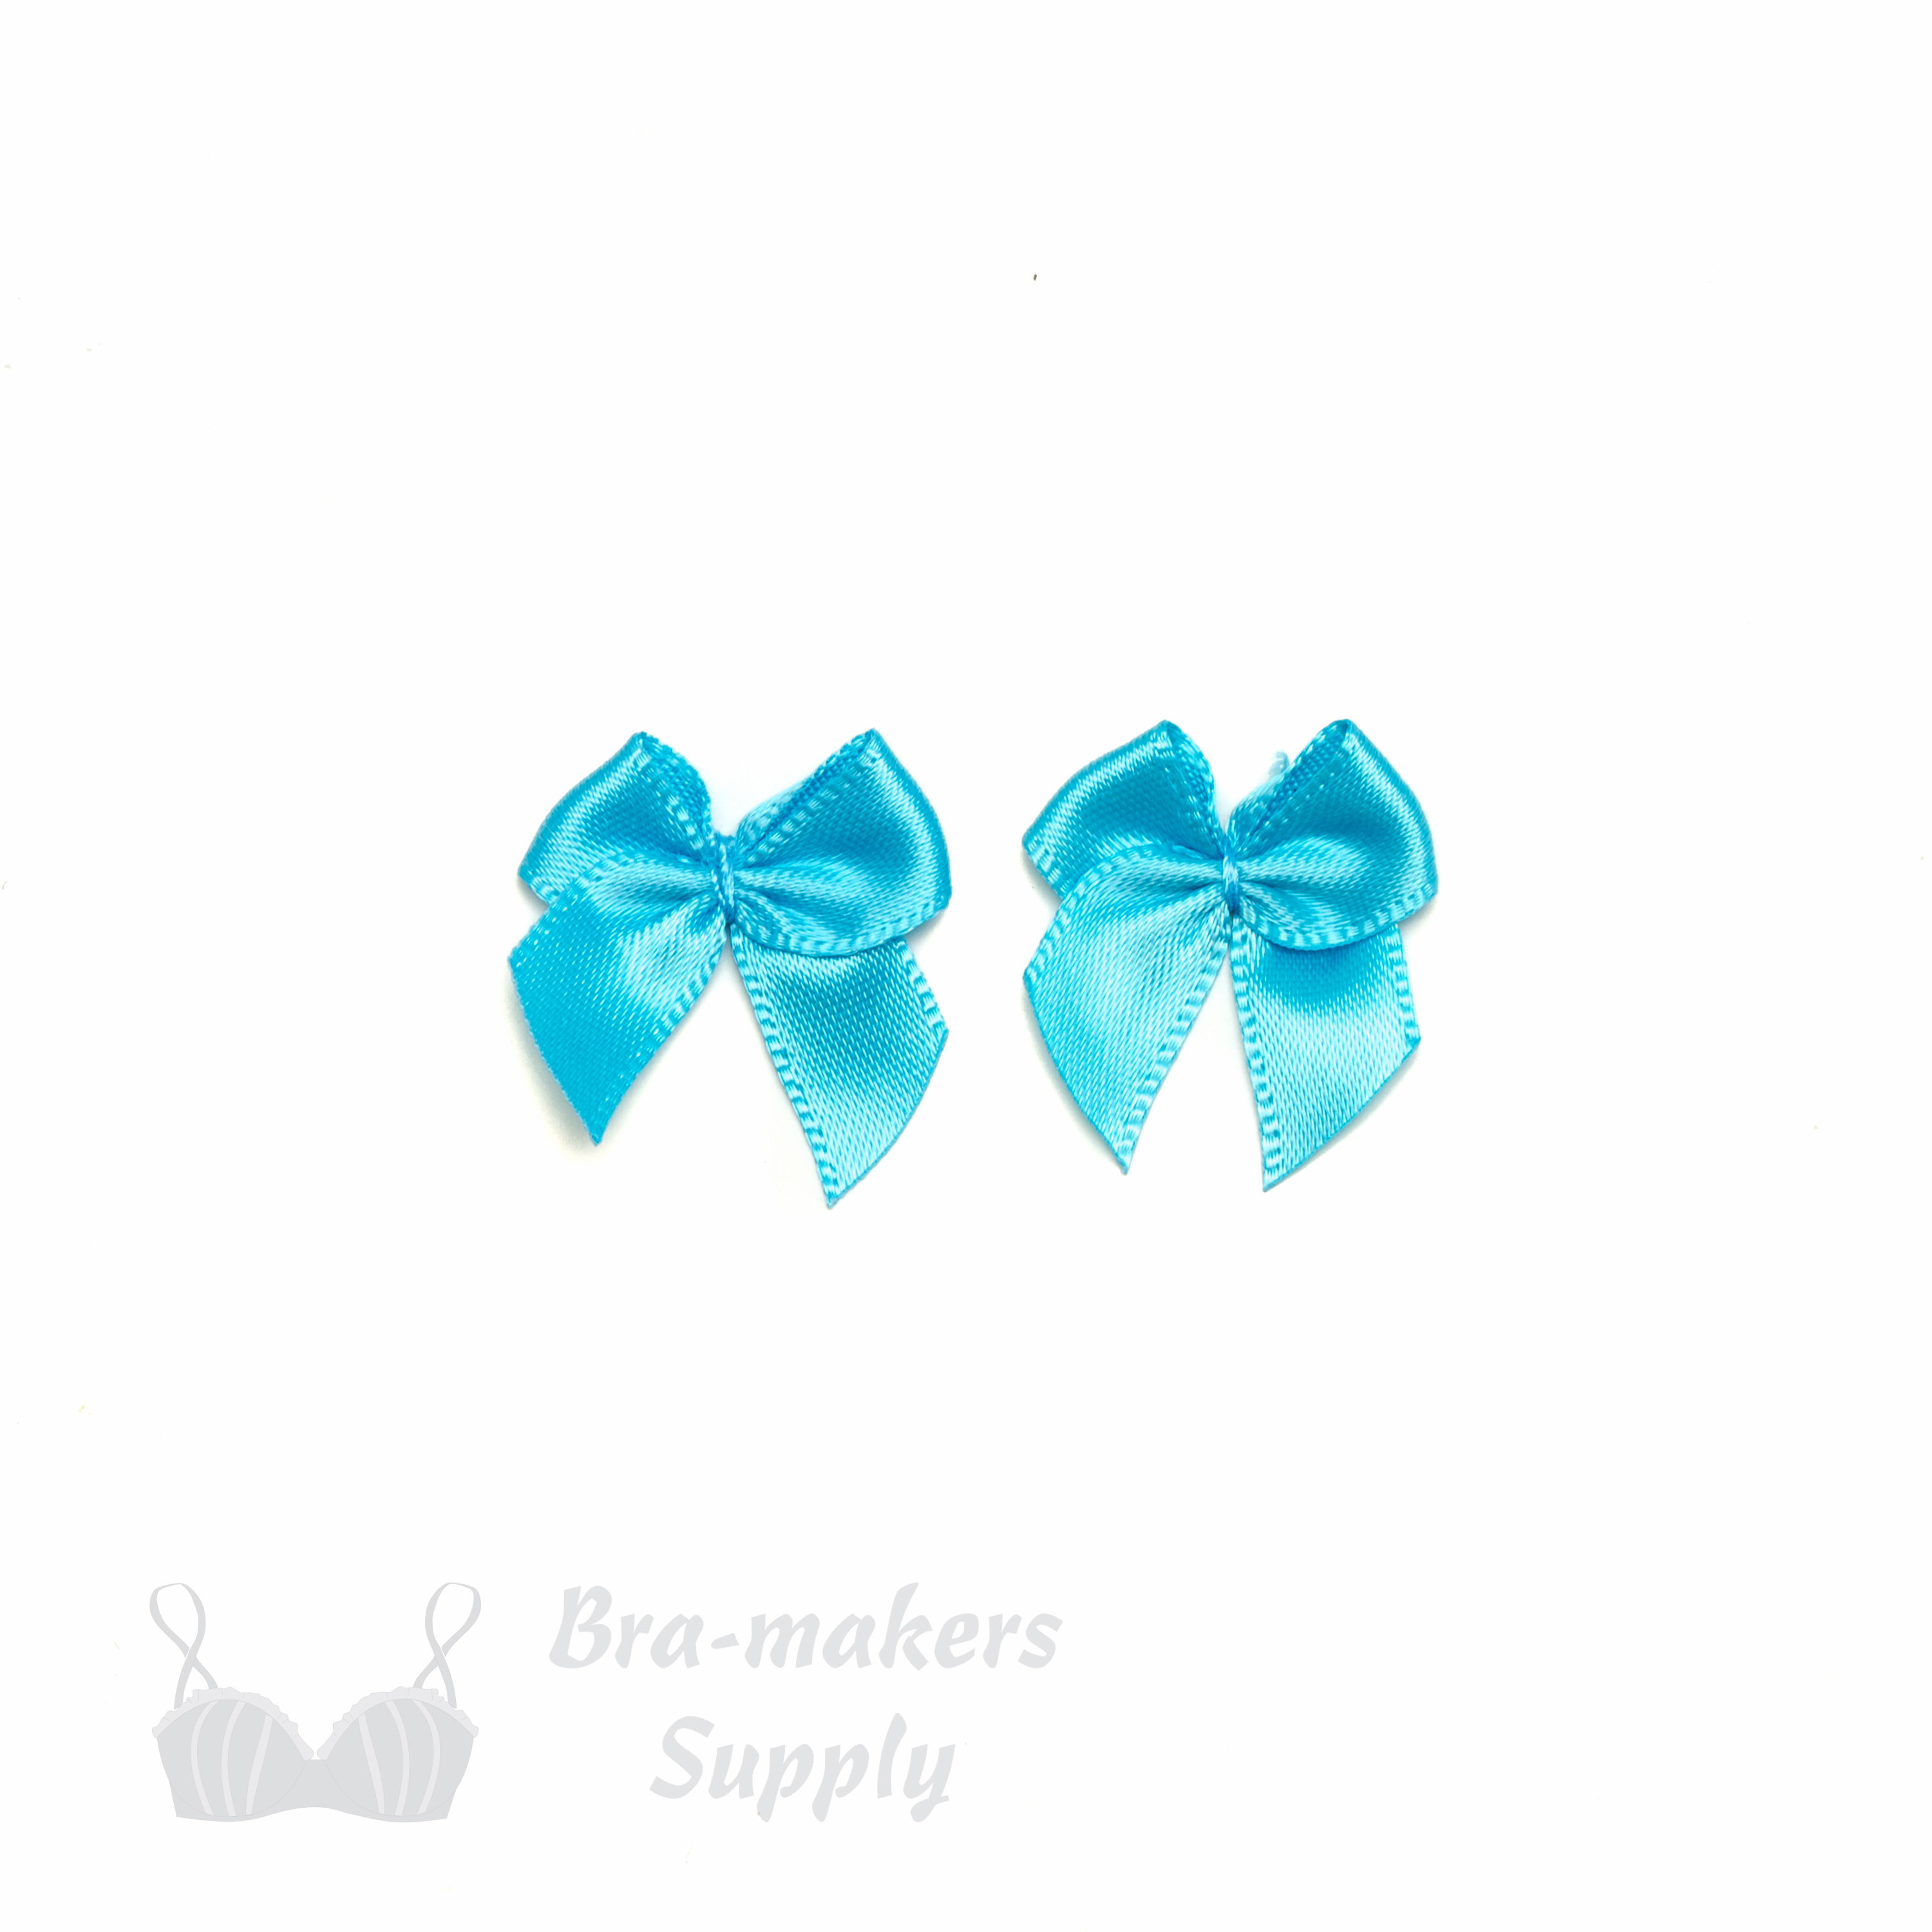 Decorative Bra Bows - add the finishing touch - Bra-Makers Supply